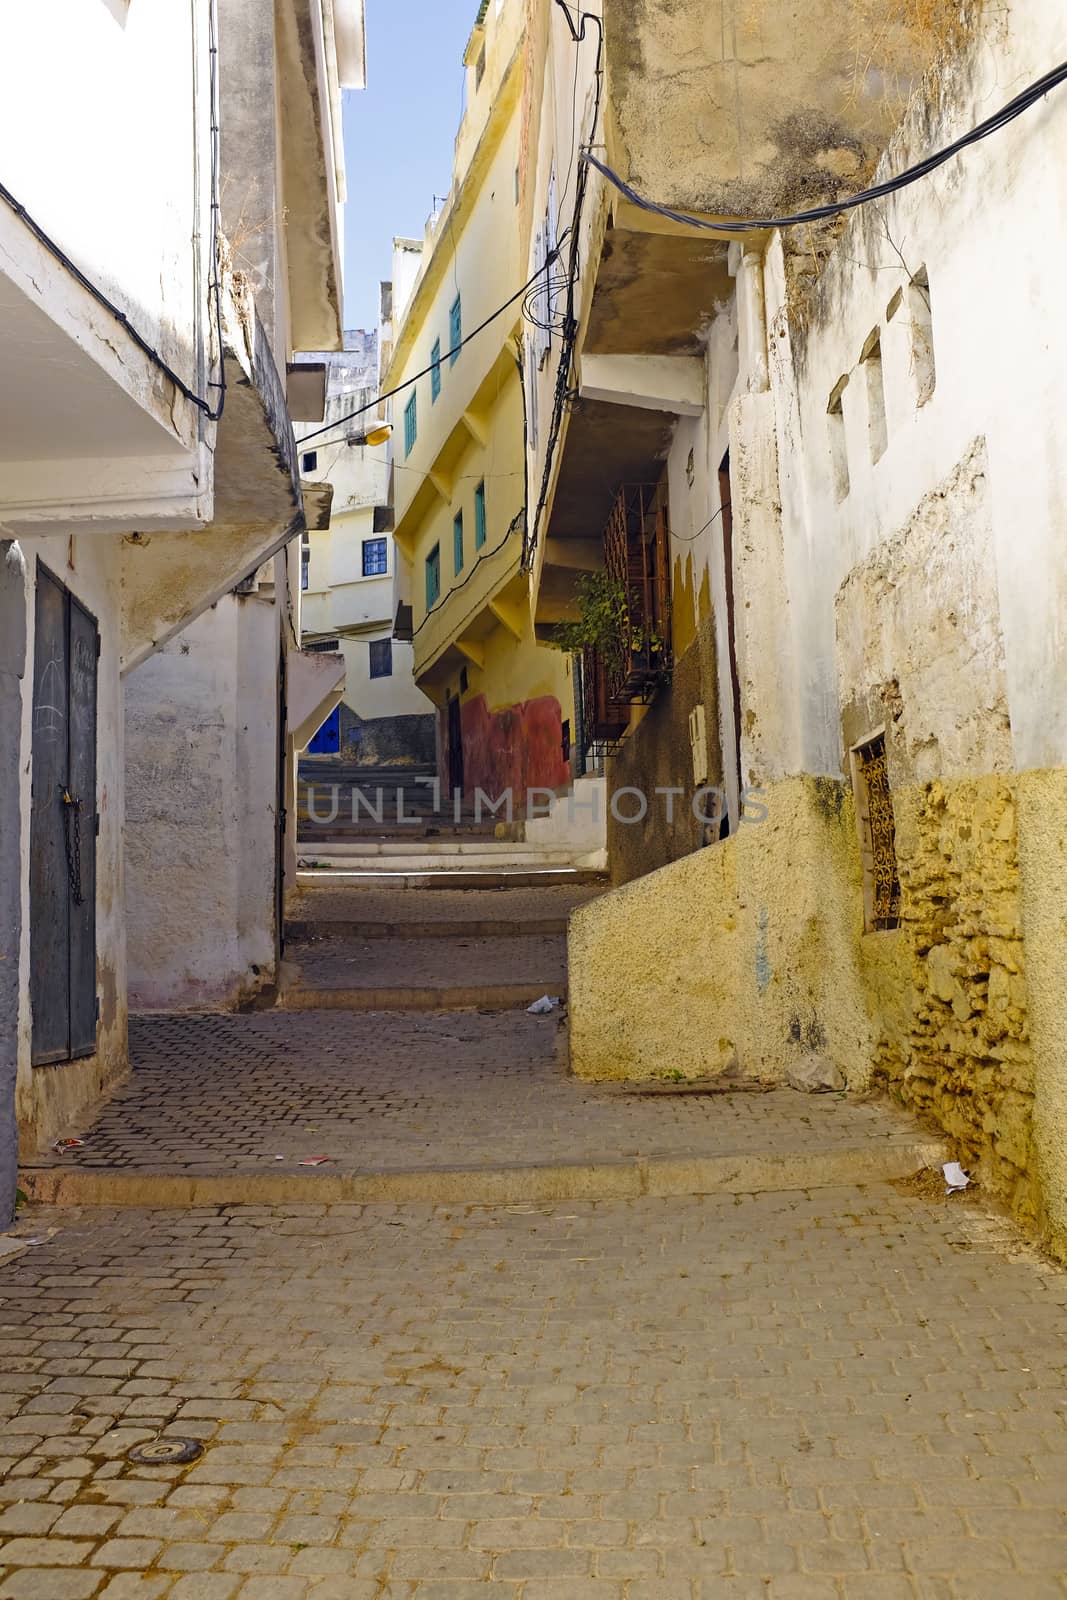 Old street in Moulay Idriss in  Morocco. It is holy town for the Moroccan people. It was here that Moulay Idriss I arrived in 789, bringing with him the religion of Islam and starting new dynasty.